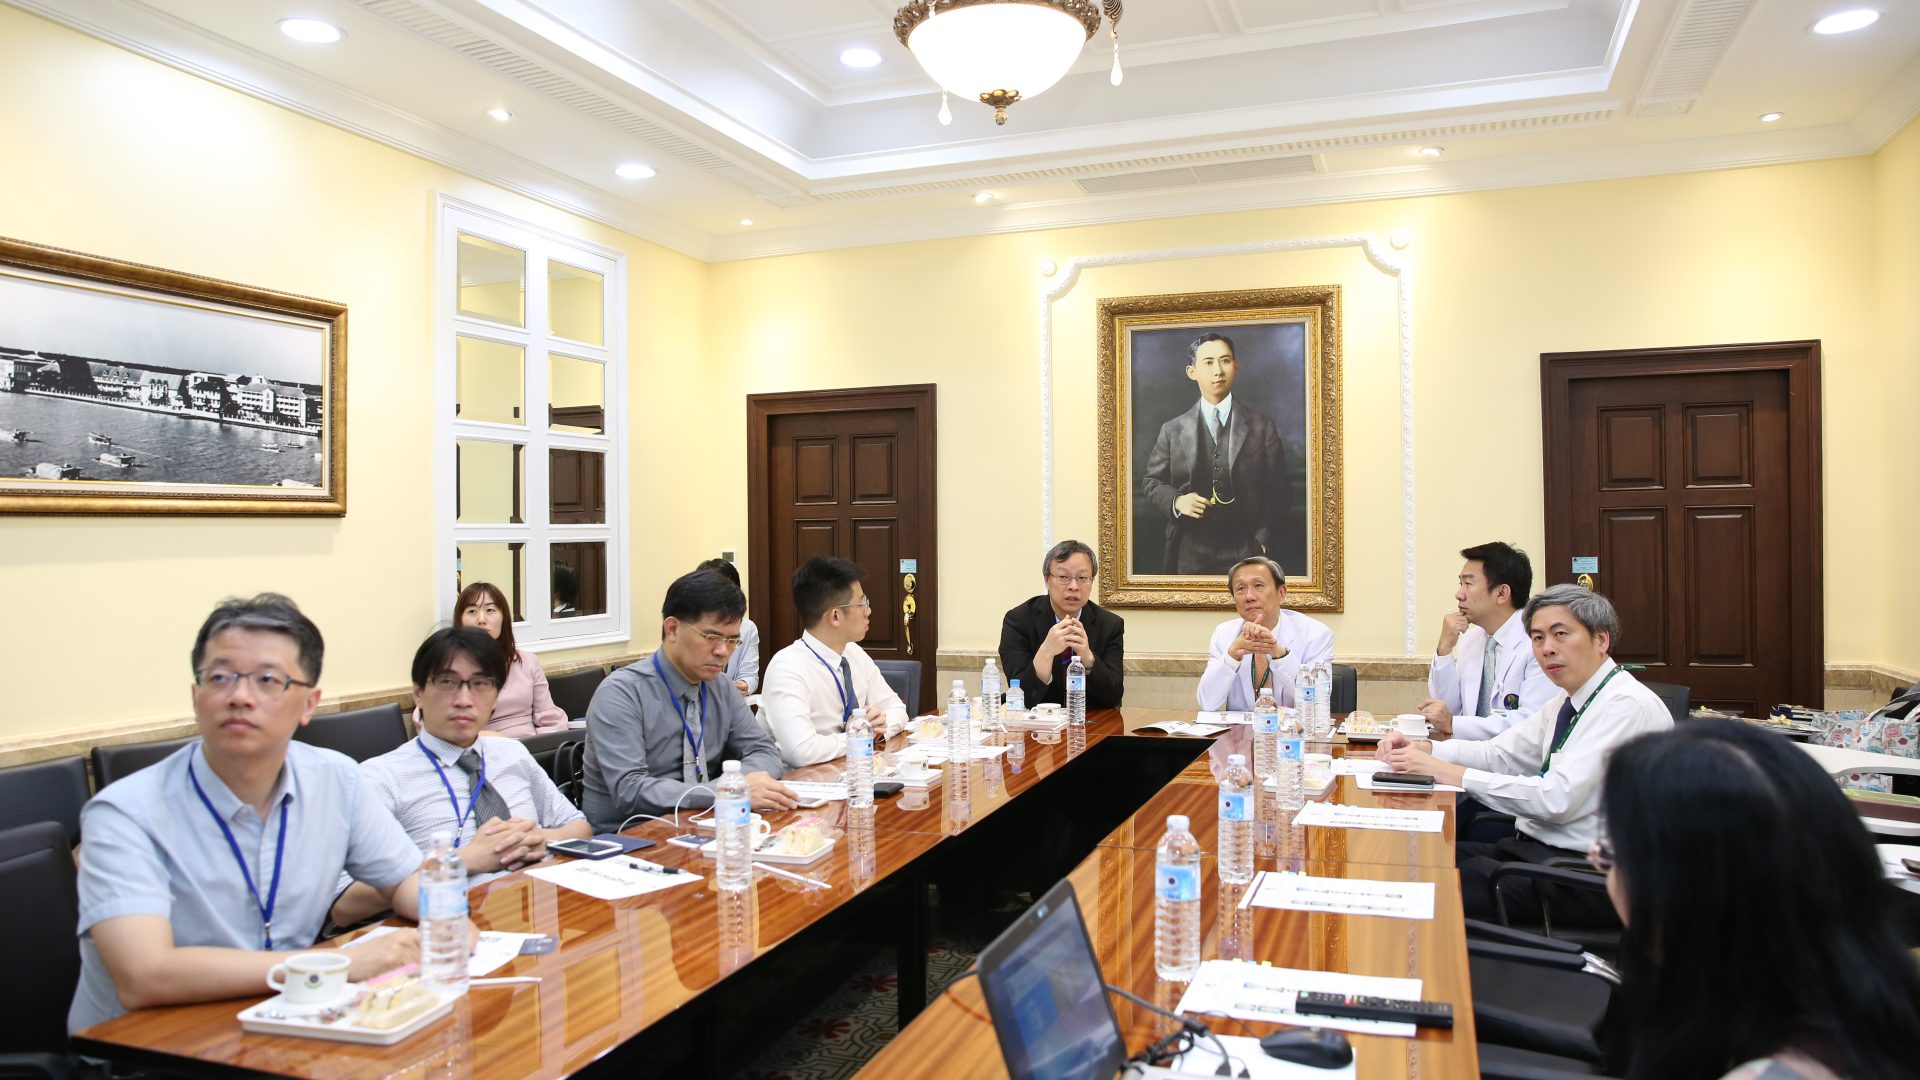 Superintendent and delegates from Yuanlin Christian Hospital, Changhua Christian Hospital Foundation visited Siriraj